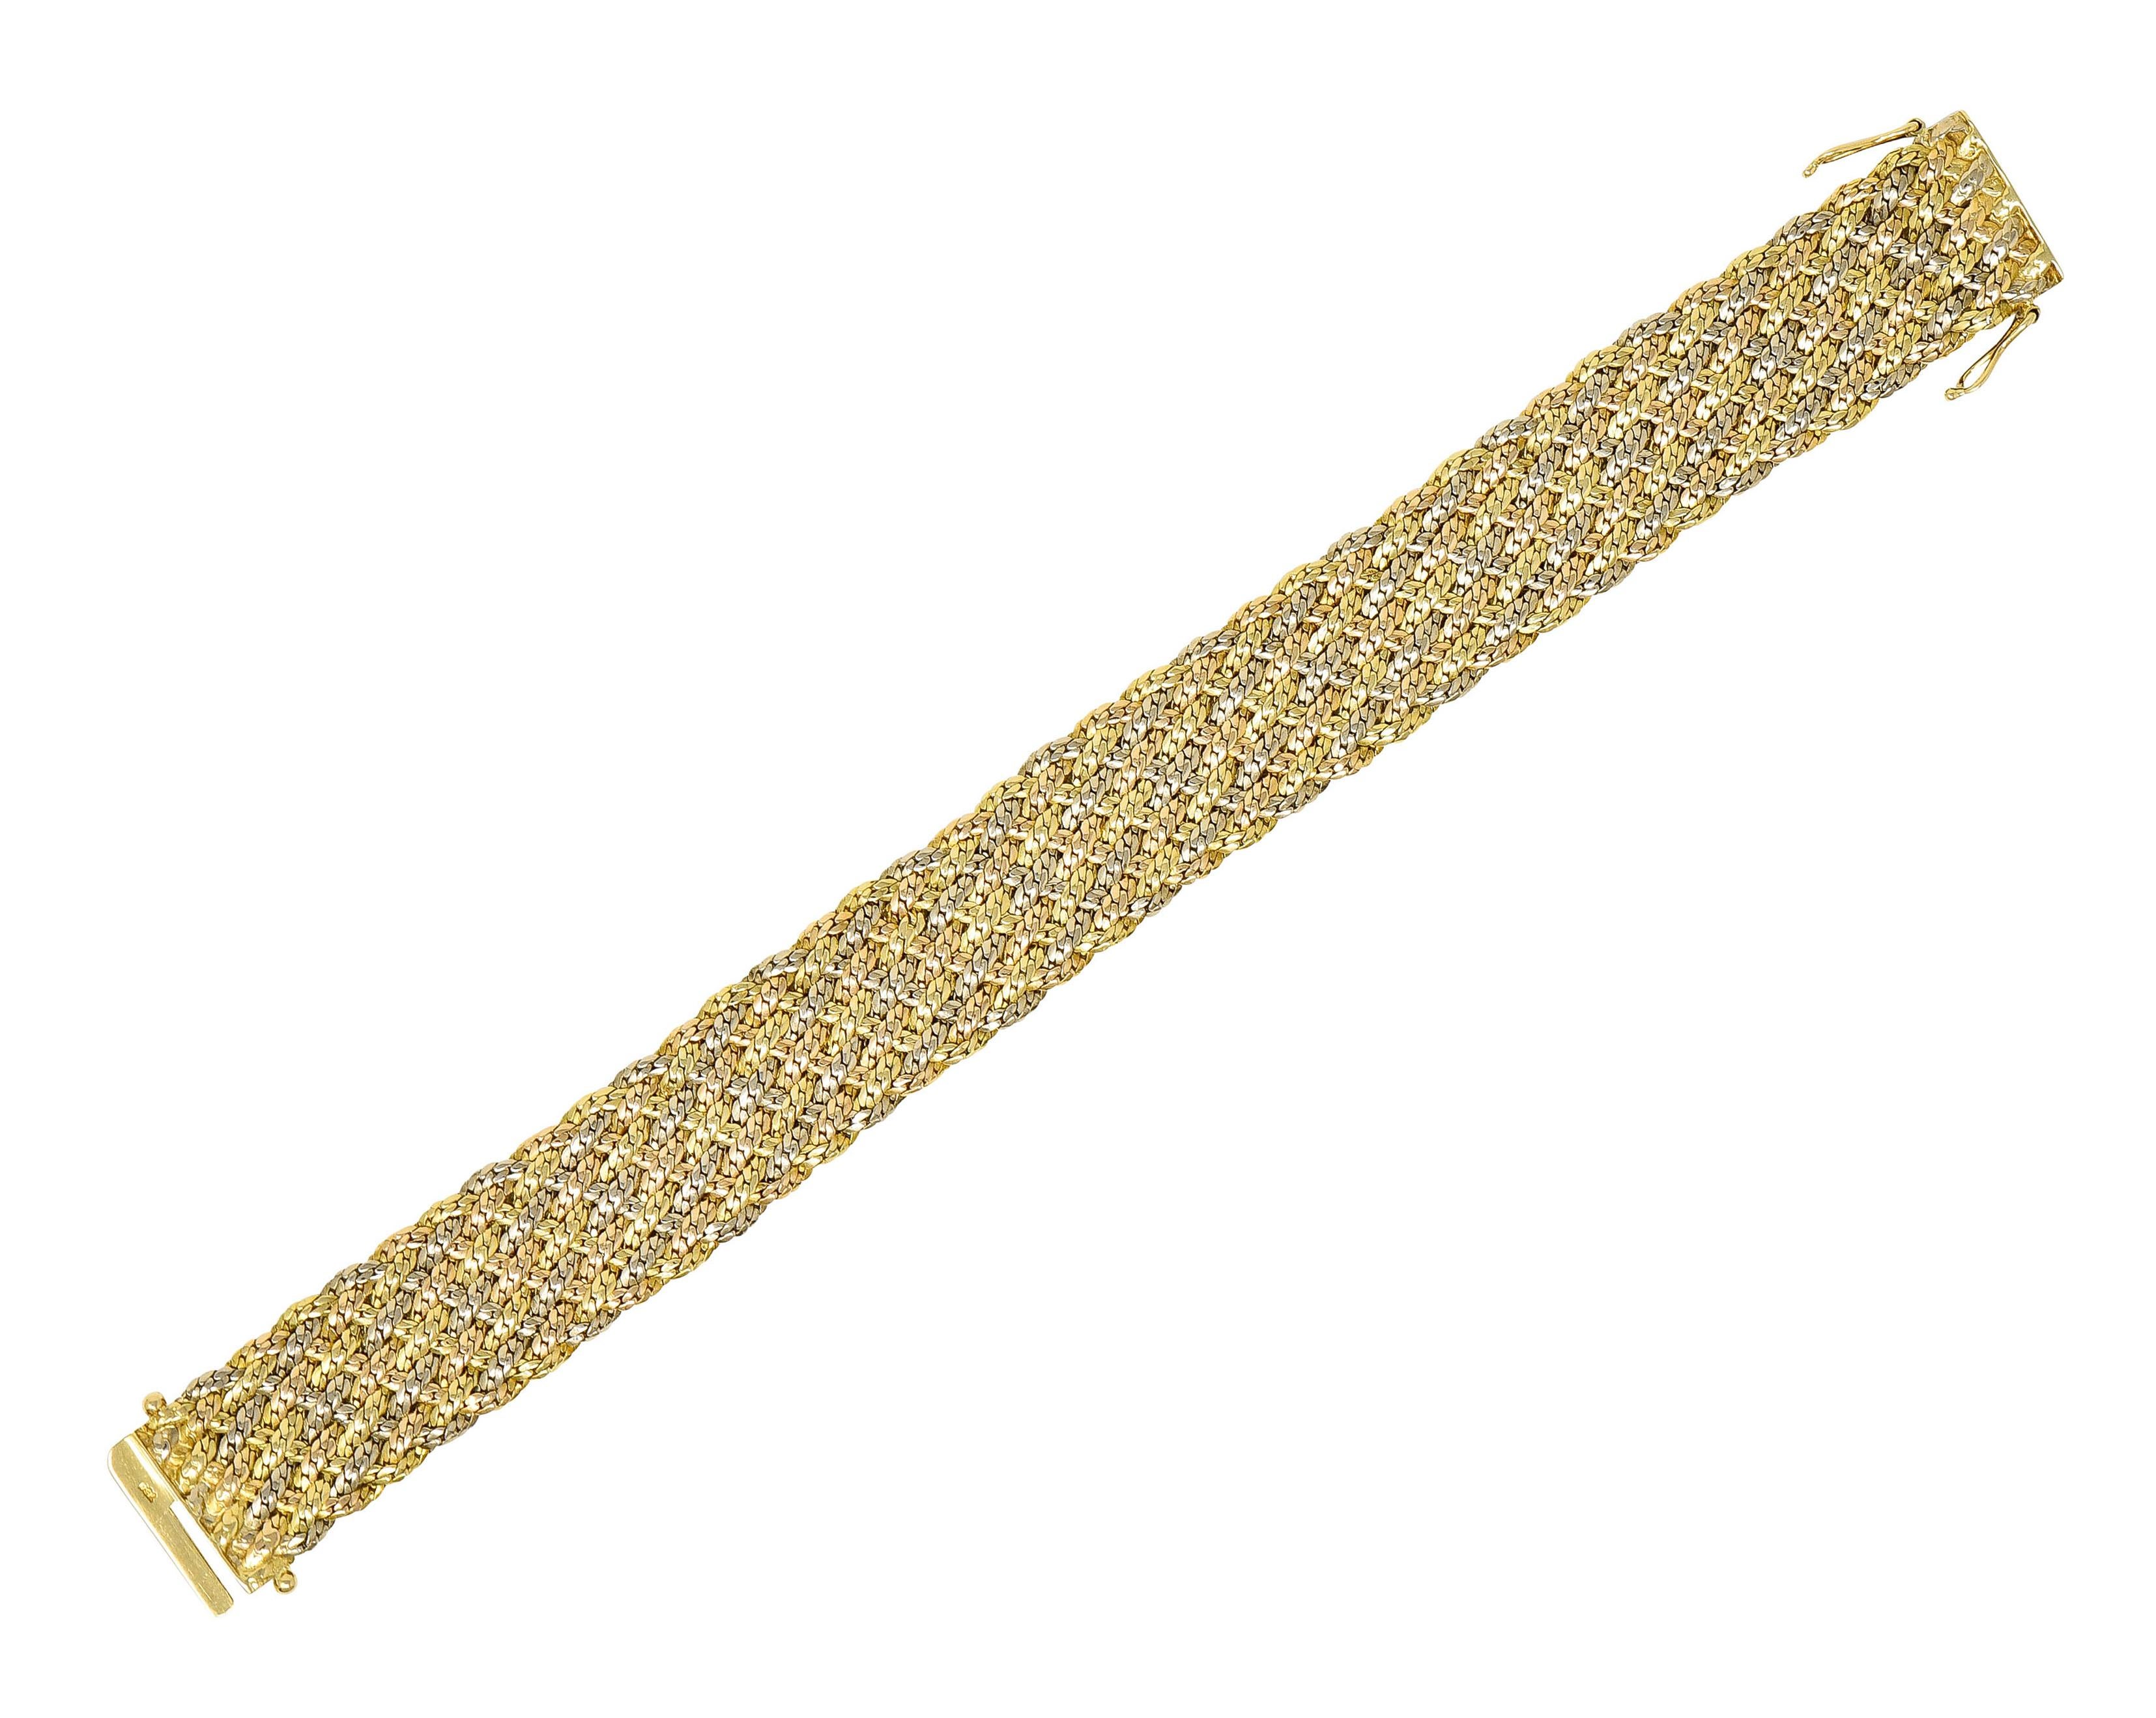 Rose, yellow, and white gold chain is woven together as a wide bracelet

Very malleable and completing as polished gold terminals

Functioning as a concealed slide clasp with two figure eight safeties

Emblazoned Piaget and stamped 750 for 18 karat